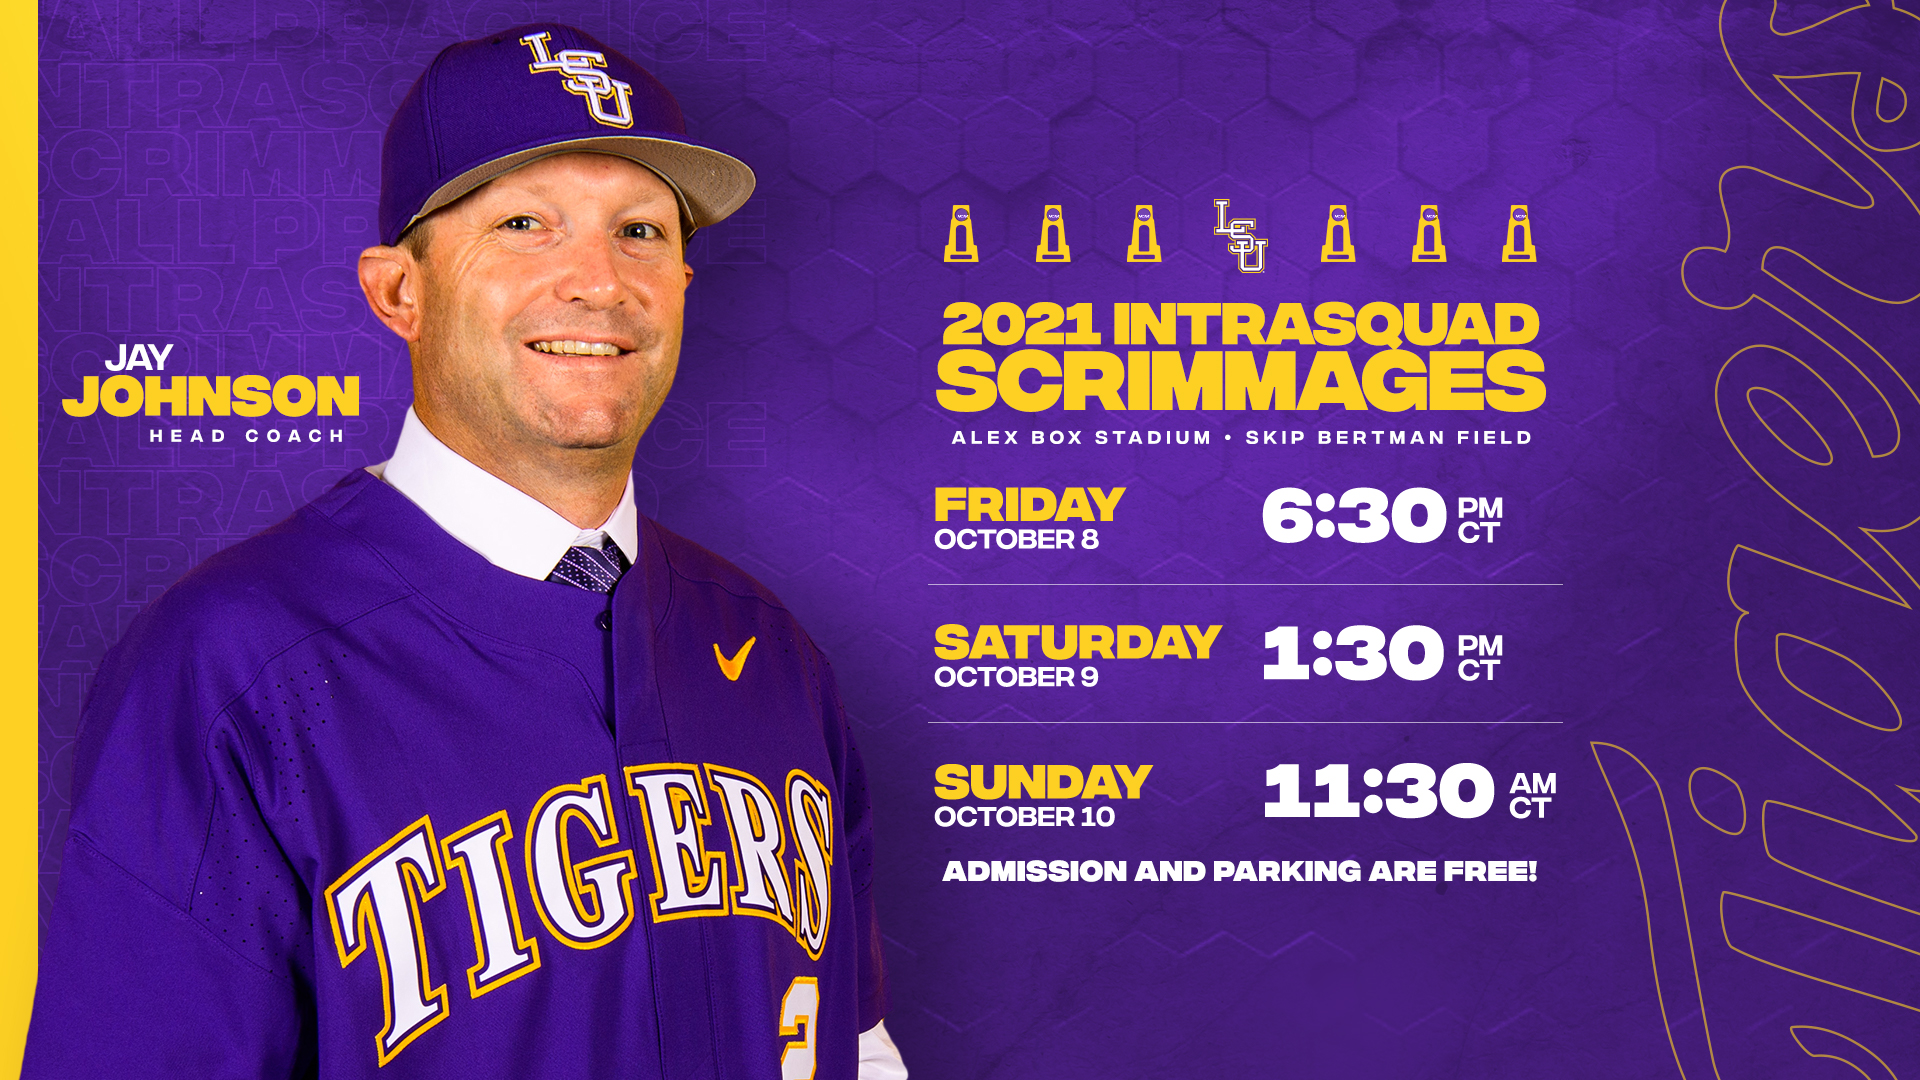 Lsu Baseball 2022 Schedule Lsu Baseball On Twitter: "Get Your First Look At The 2022 Tigers This  Weekend At "The Box!" #Geauxtigers 🔗Https://T.co/E2Icxttd2J  Https://T.co/X1Hwe84Q7S" / Twitter